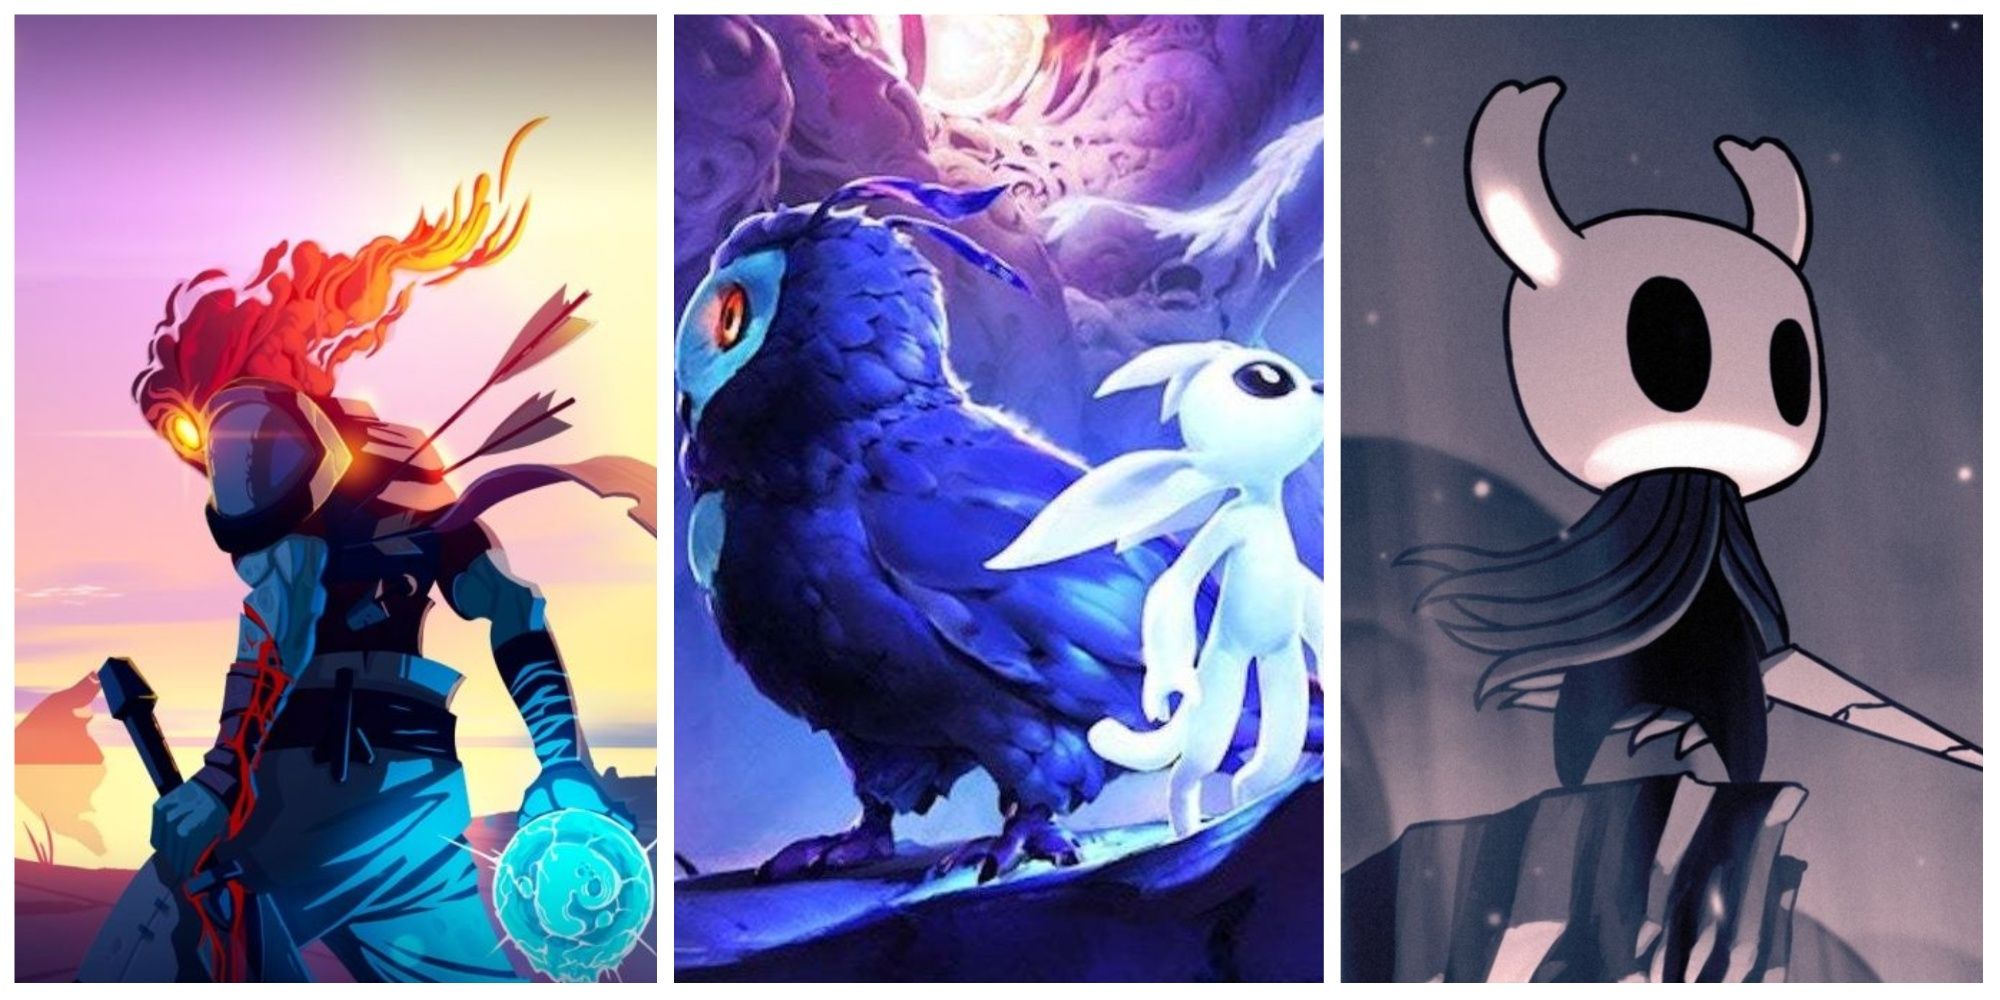 Collage of platformer character art featuring the main characters of Dead Cells (left), Ori and the Will of the Wisps (center), and Hollow Knight (right)